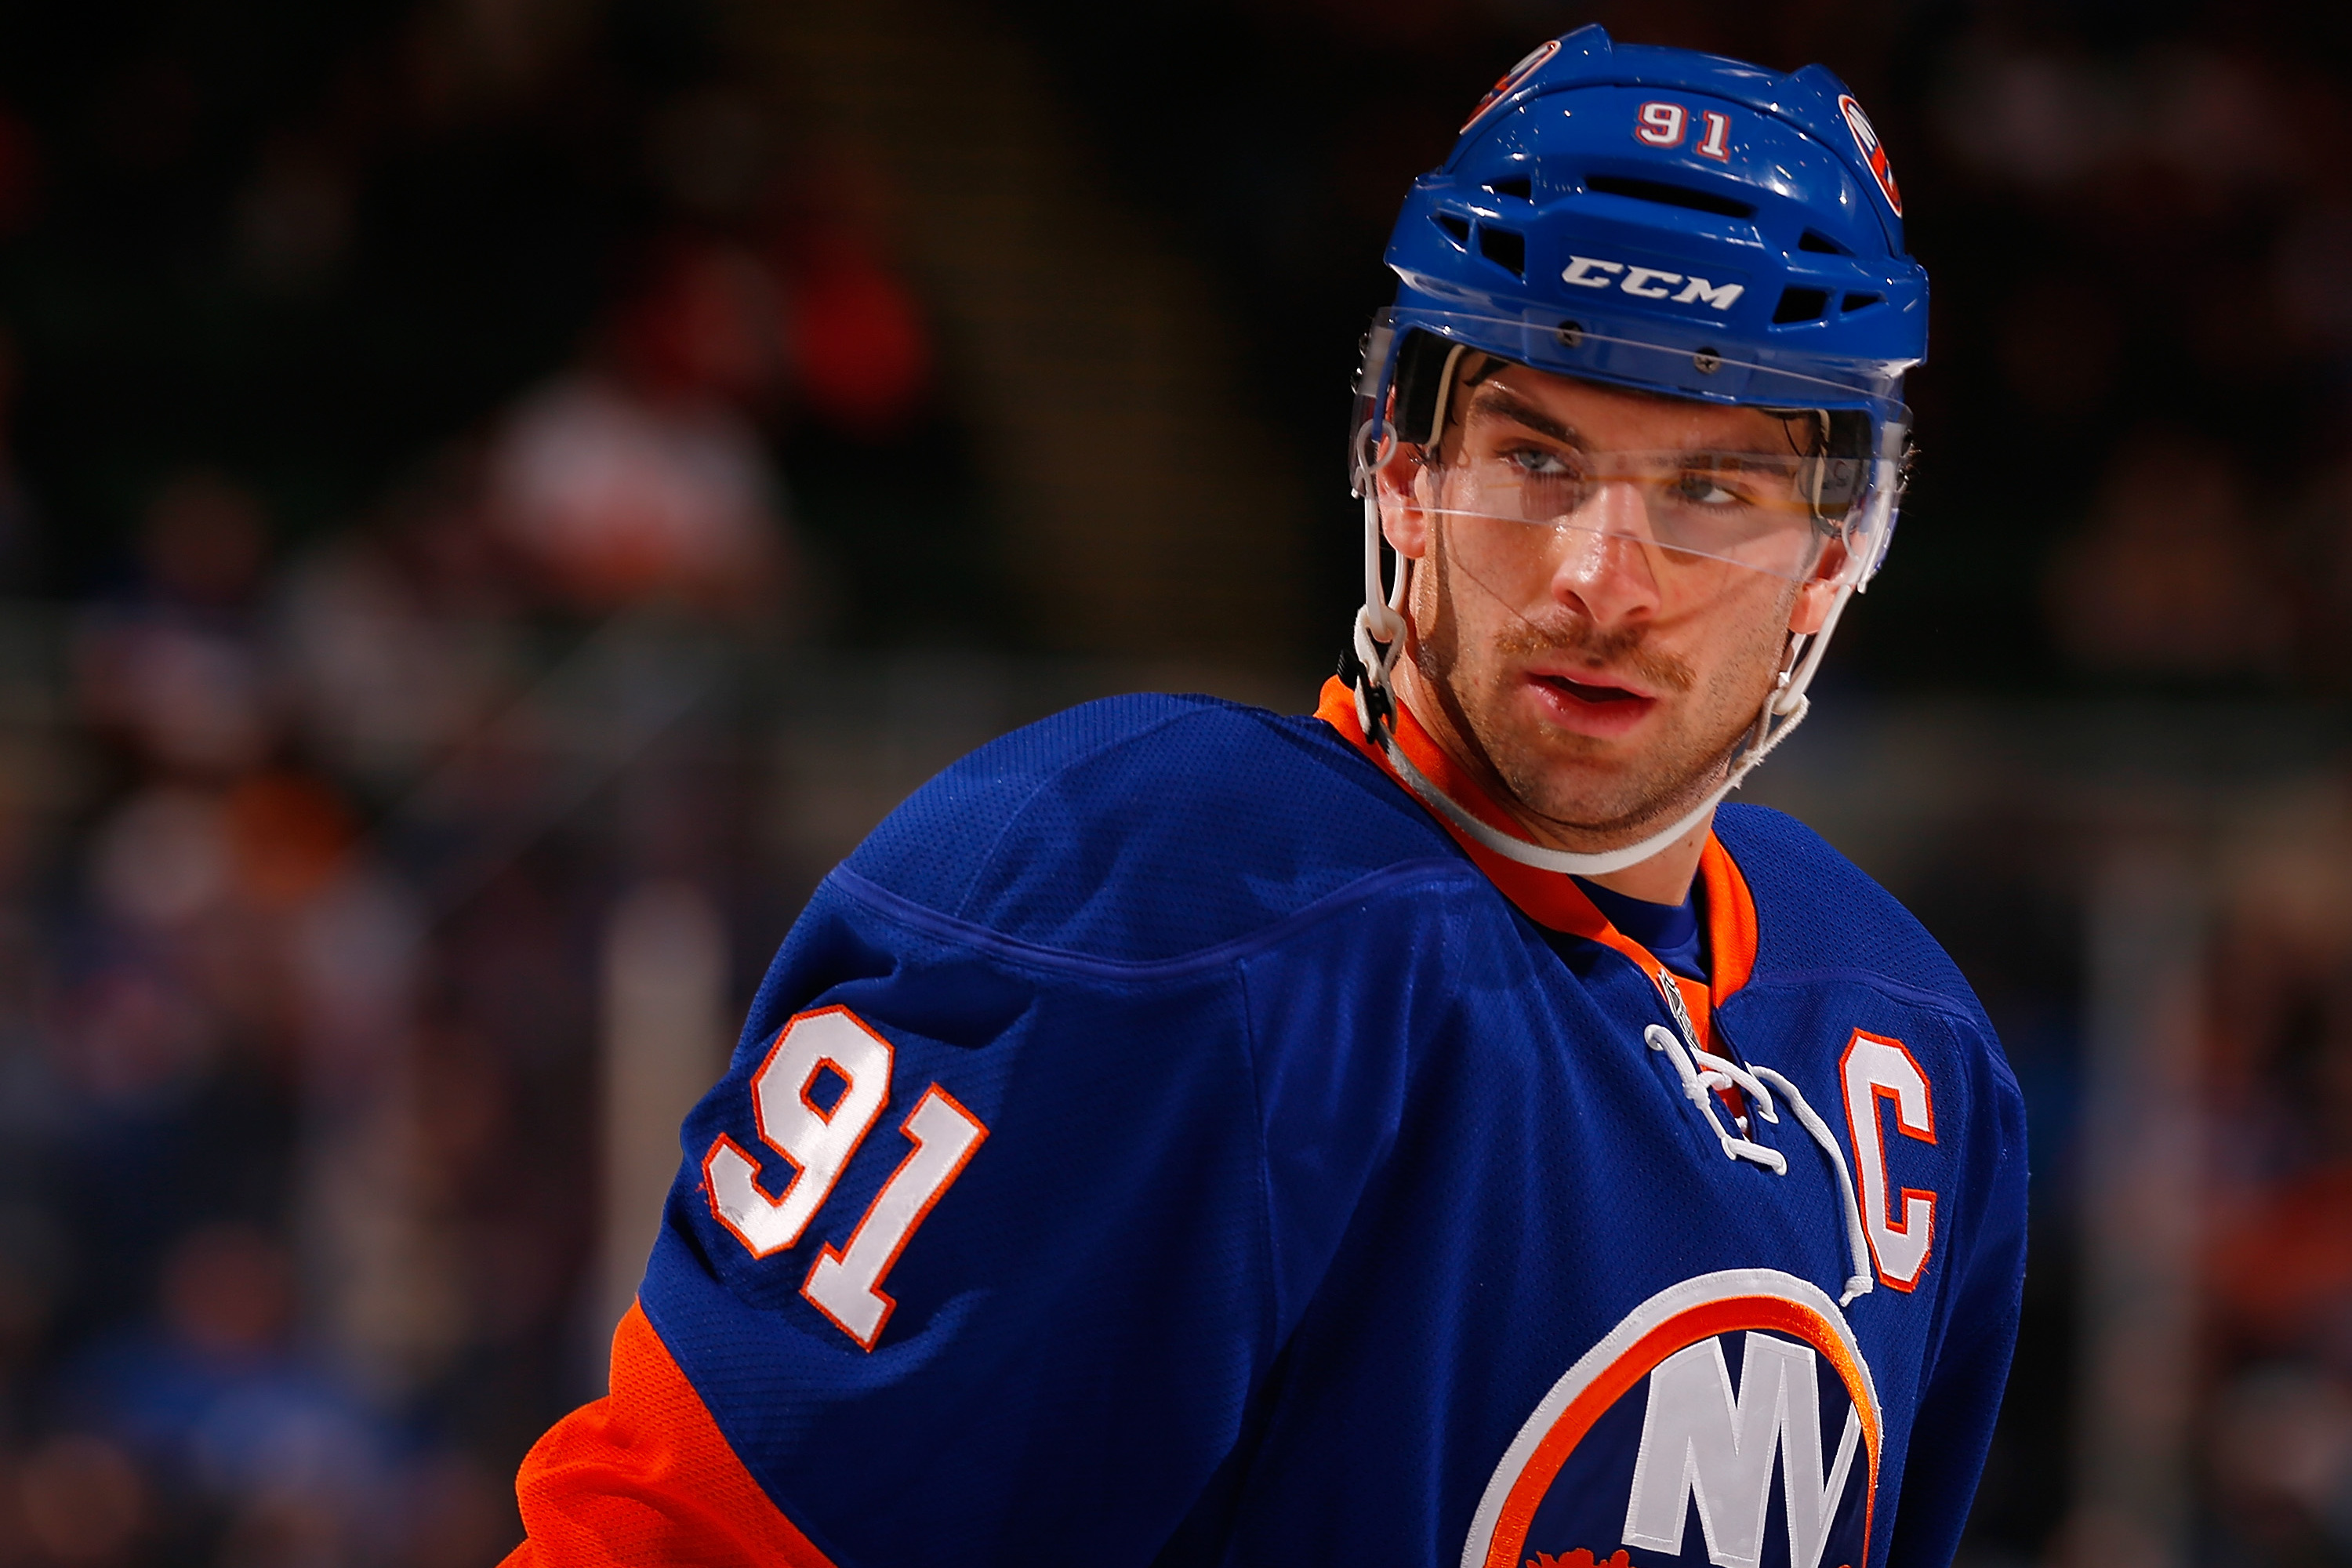 Golf fan and Islanders star John Tavares helps out PGA player